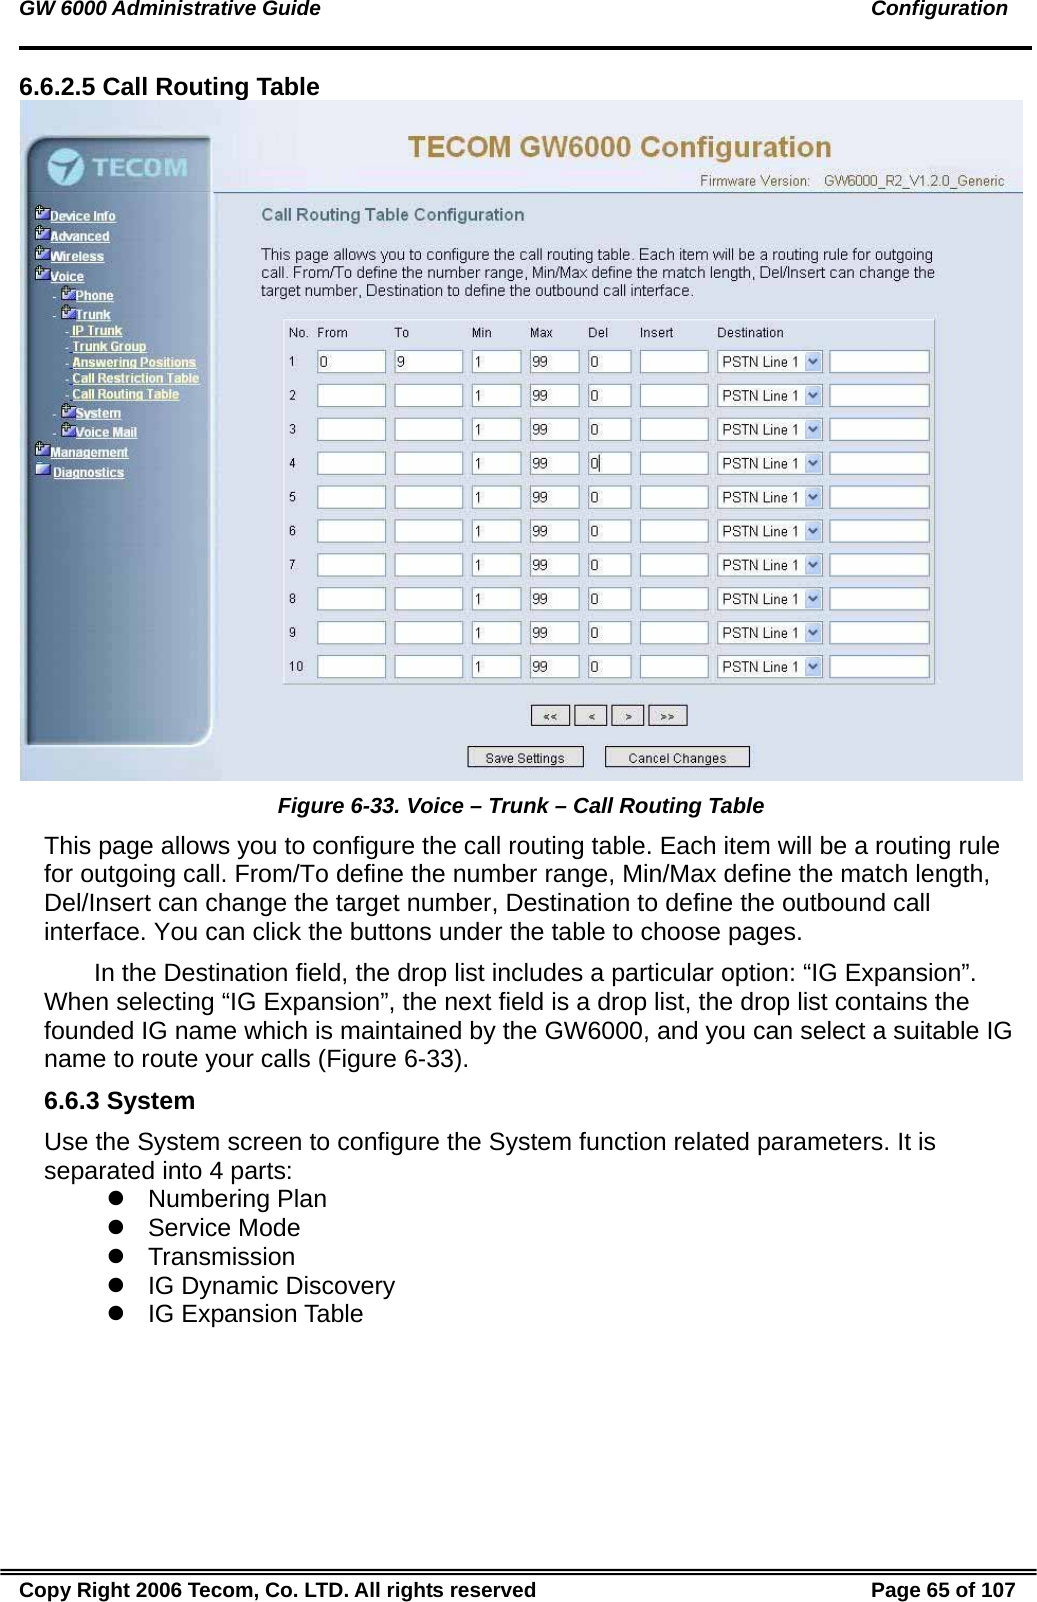 GW 6000 Administrative Guide                                                                                               Configuration 6.6.2.5 Call Routing Table  Figure 6-33. Voice – Trunk – Call Routing Table This page allows you to configure the call routing table. Each item will be a routing rule for outgoing call. From/To define the number range, Min/Max define the match length, Del/Insert can change the target number, Destination to define the outbound call interface. You can click the buttons under the table to choose pages.      In the Destination field, the drop list includes a particular option: “IG Expansion”. When selecting “IG Expansion”, the next field is a drop list, the drop list contains the founded IG name which is maintained by the GW6000, and you can select a suitable IG name to route your calls (Figure 6-33). 6.6.3 System Use the System screen to configure the System function related parameters. It is separated into 4 parts: z Numbering Plan z Service Mode z Transmission z  IG Dynamic Discovery z IG Expansion Table Copy Right 2006 Tecom, Co. LTD. All rights reserved  Page 65 of 107 